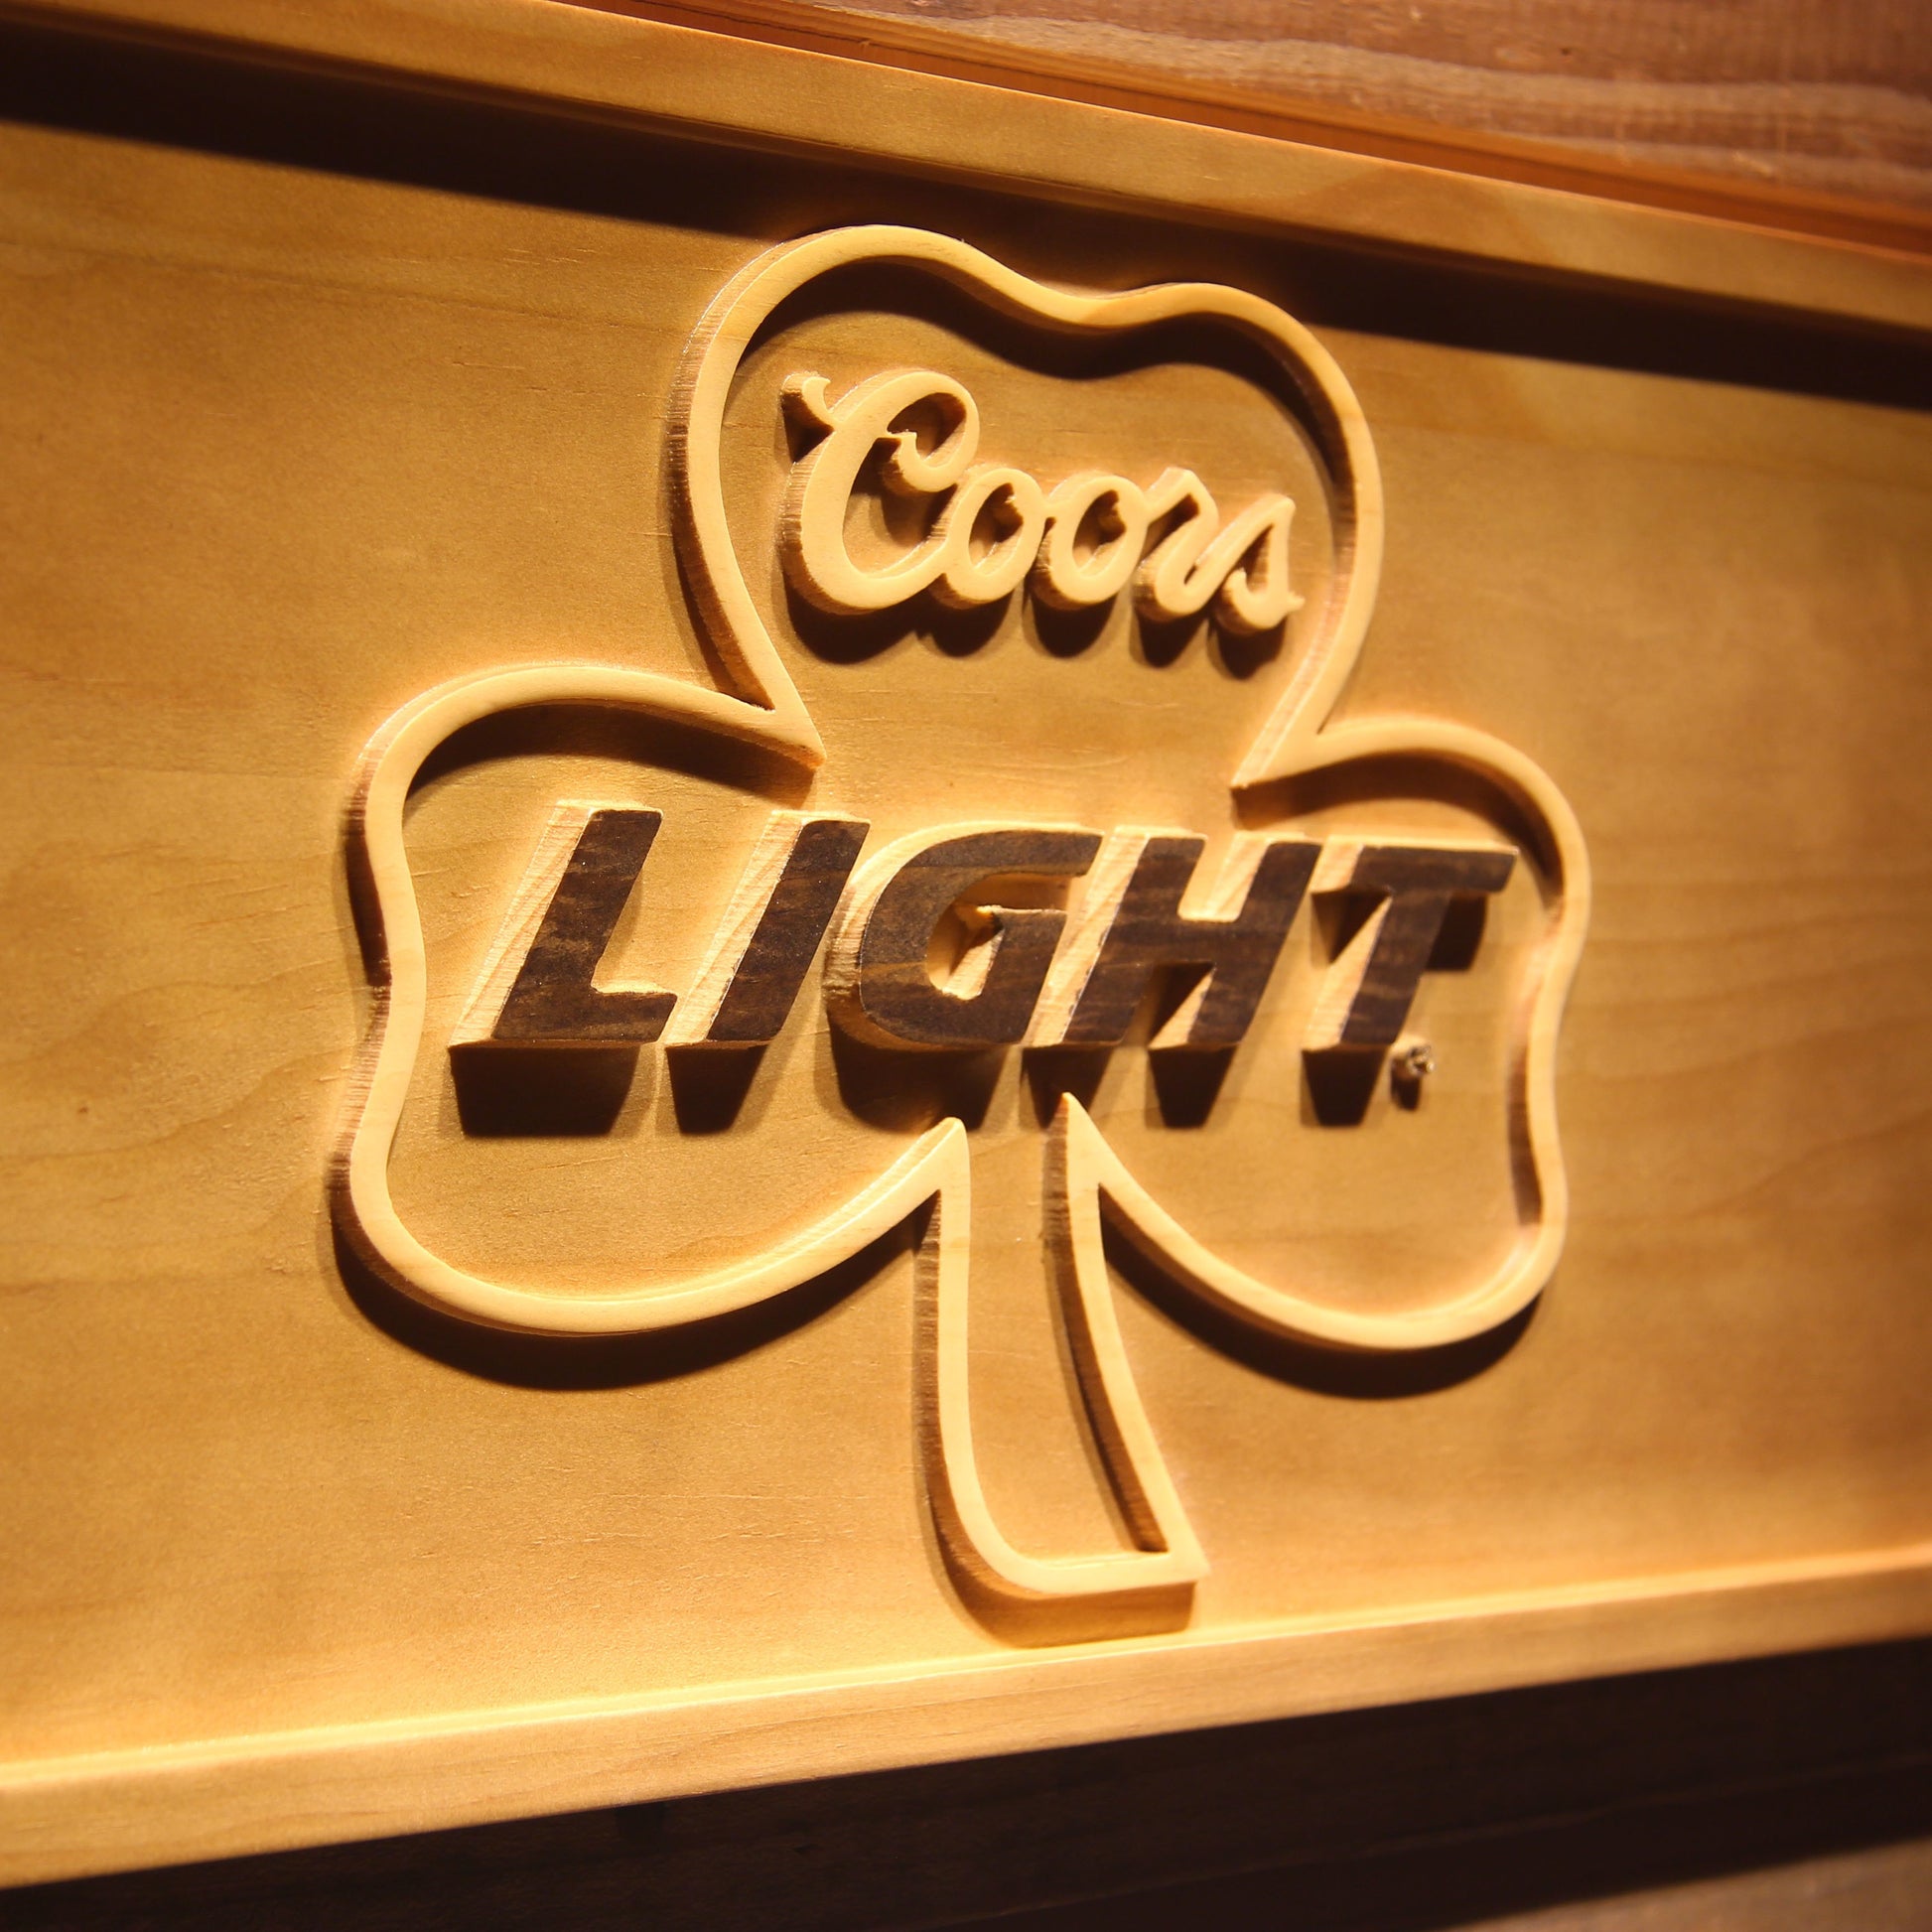 Coors Light Shamrock  3D Wooden Bar Signs by Woody Signs Co. - Handmade Crafted Unique Wooden Creative